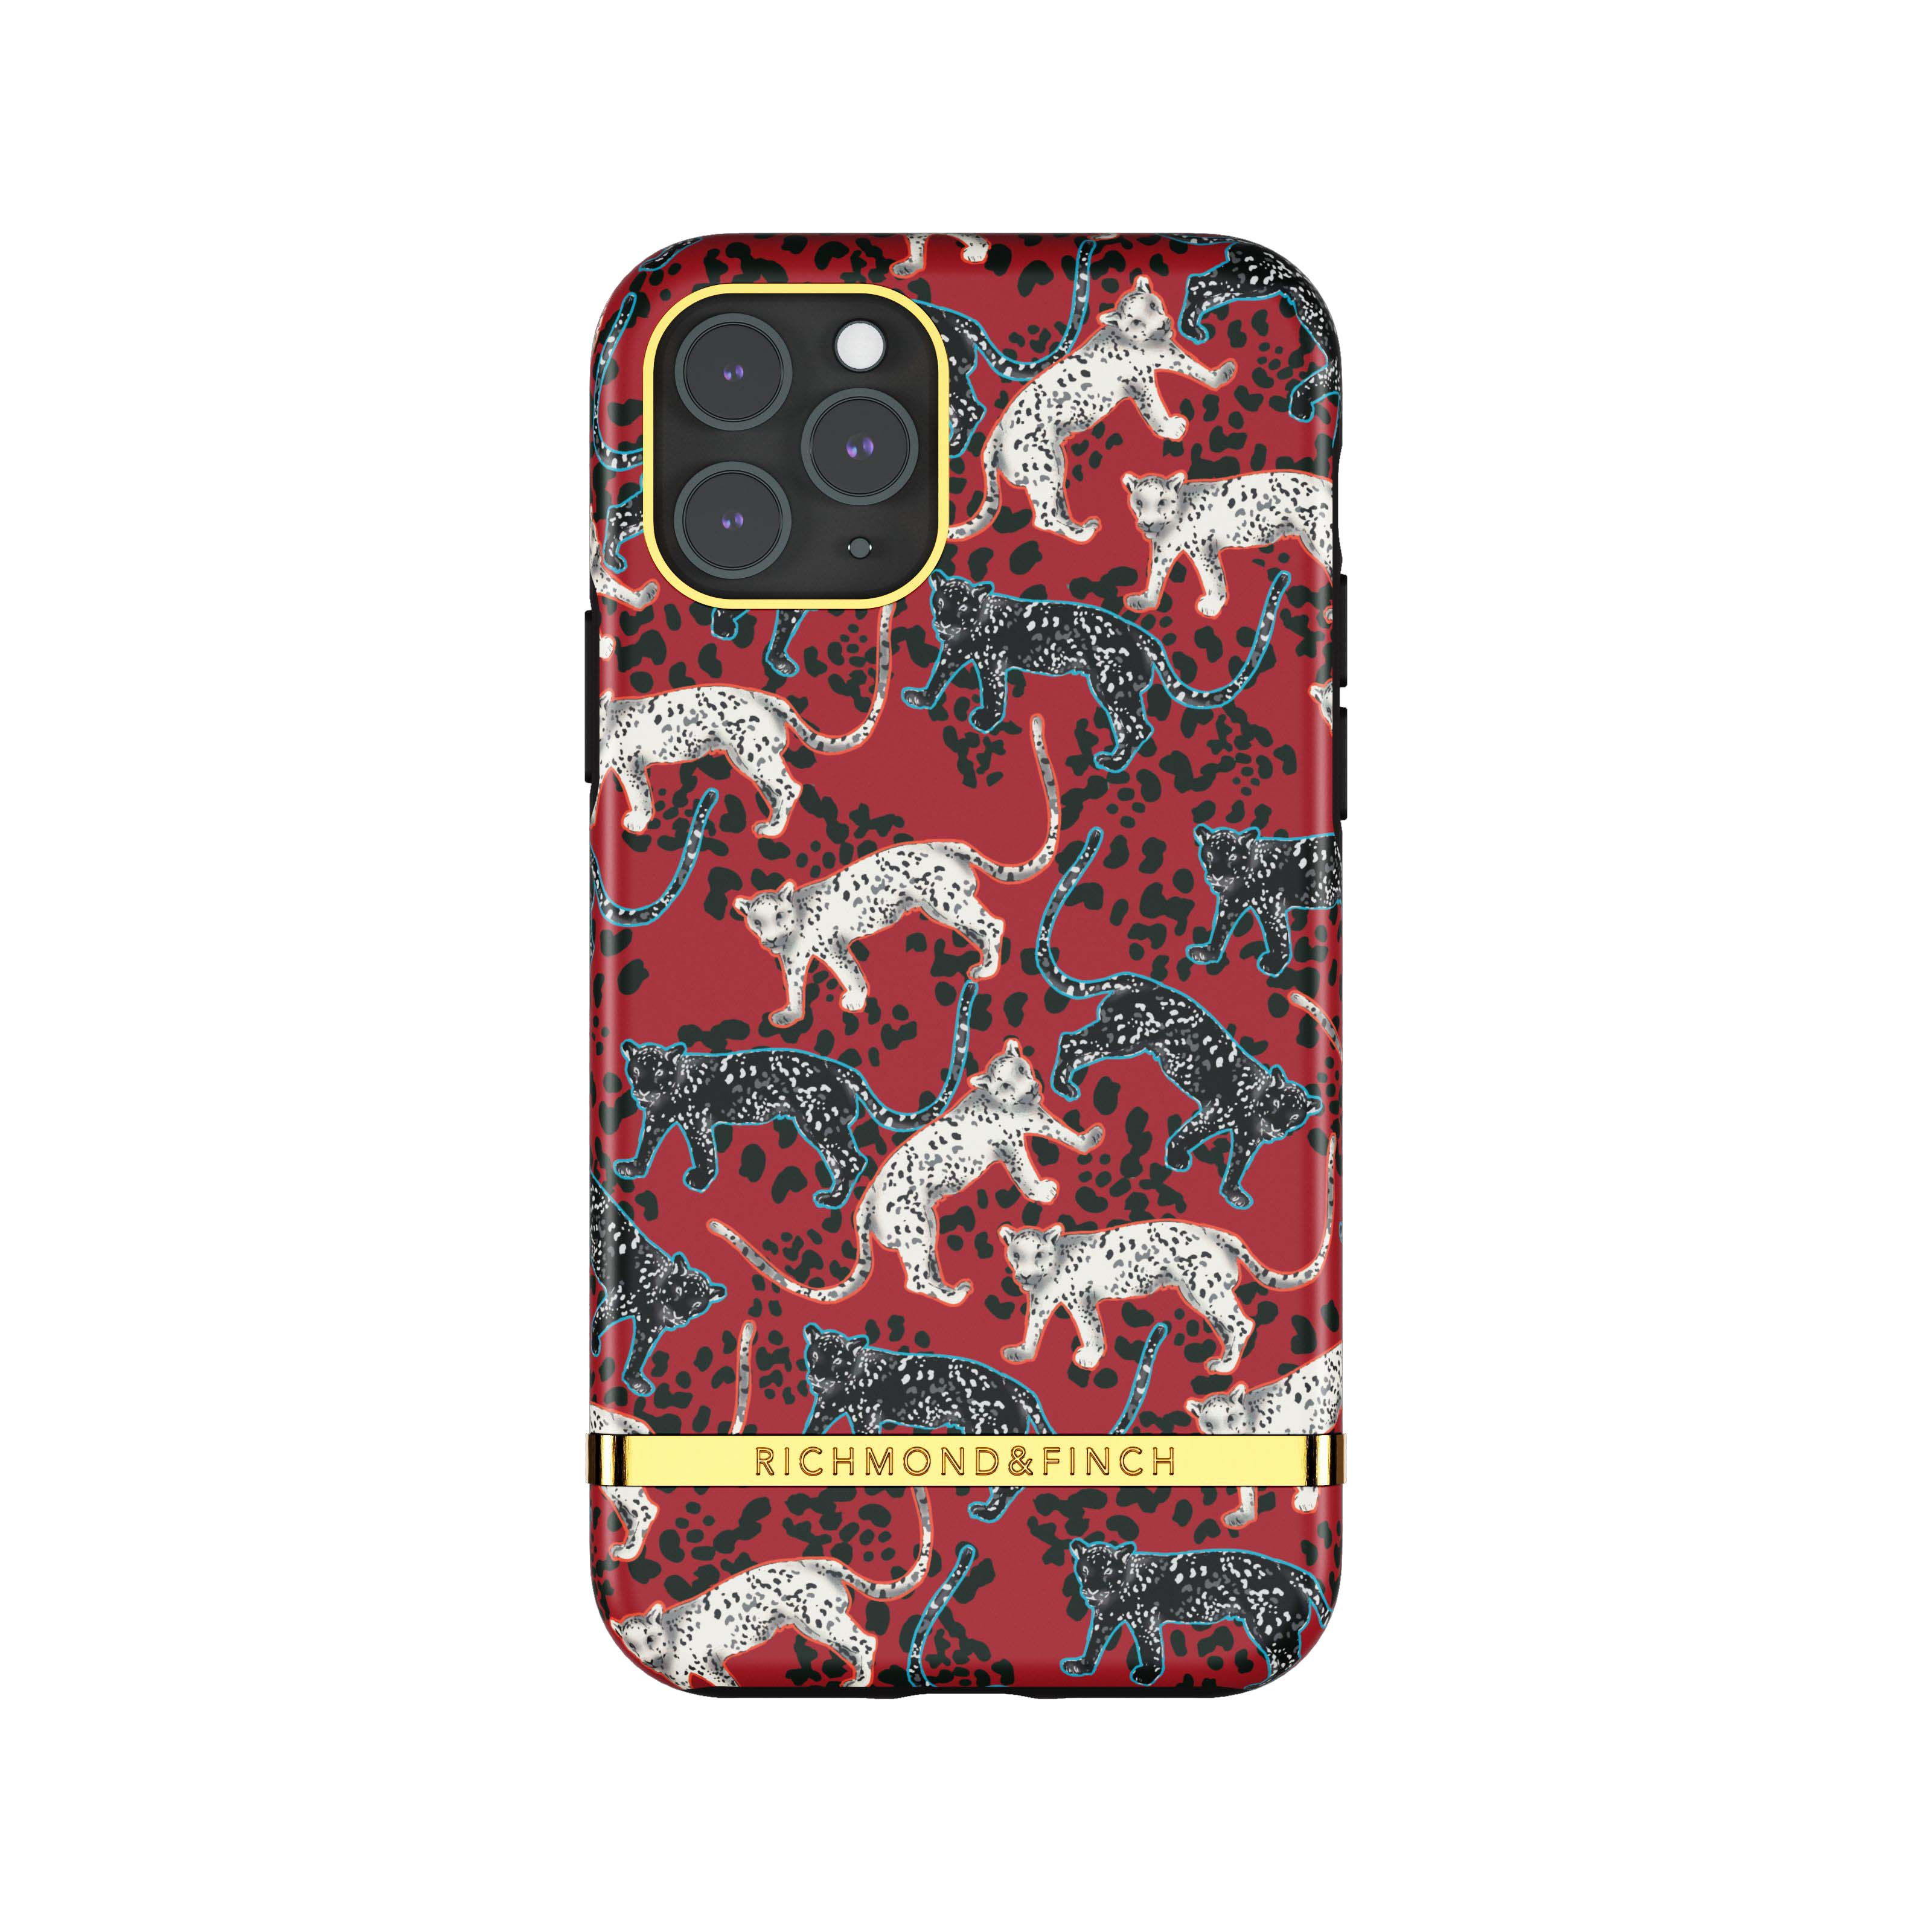 RICHMOND & FINCH Backcover, Leopard Samba RED 11 11 Red APPLE, iPhone IPHONE PRO, Pro